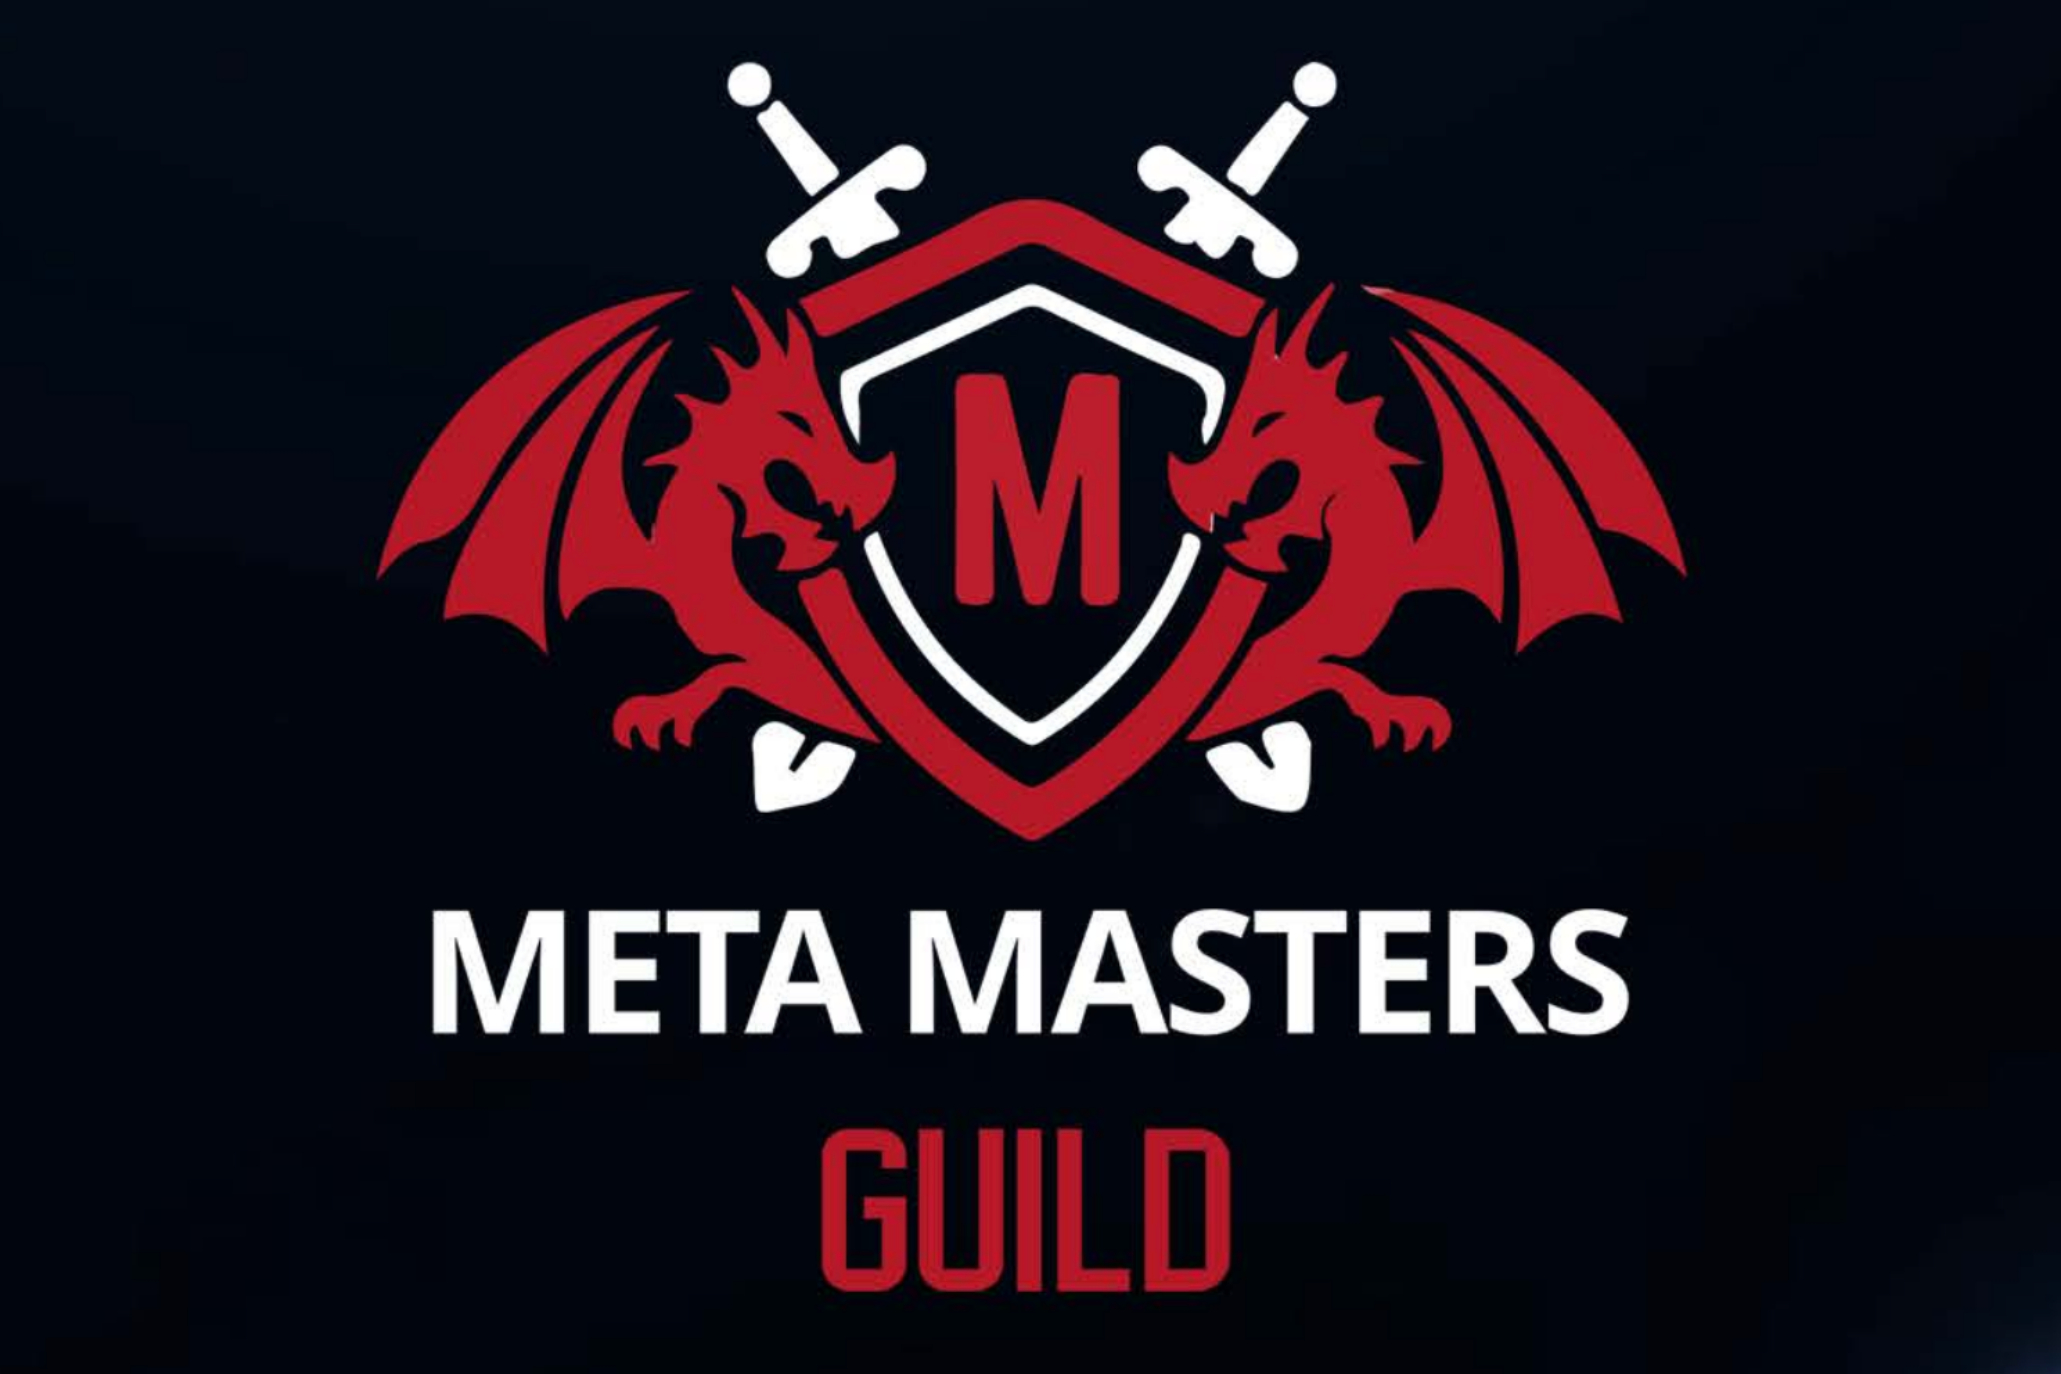 Meta Masters Guild Presale Shatters Expectations, Raises $1.1 Million in Just Two Weeks – Time to Buy?